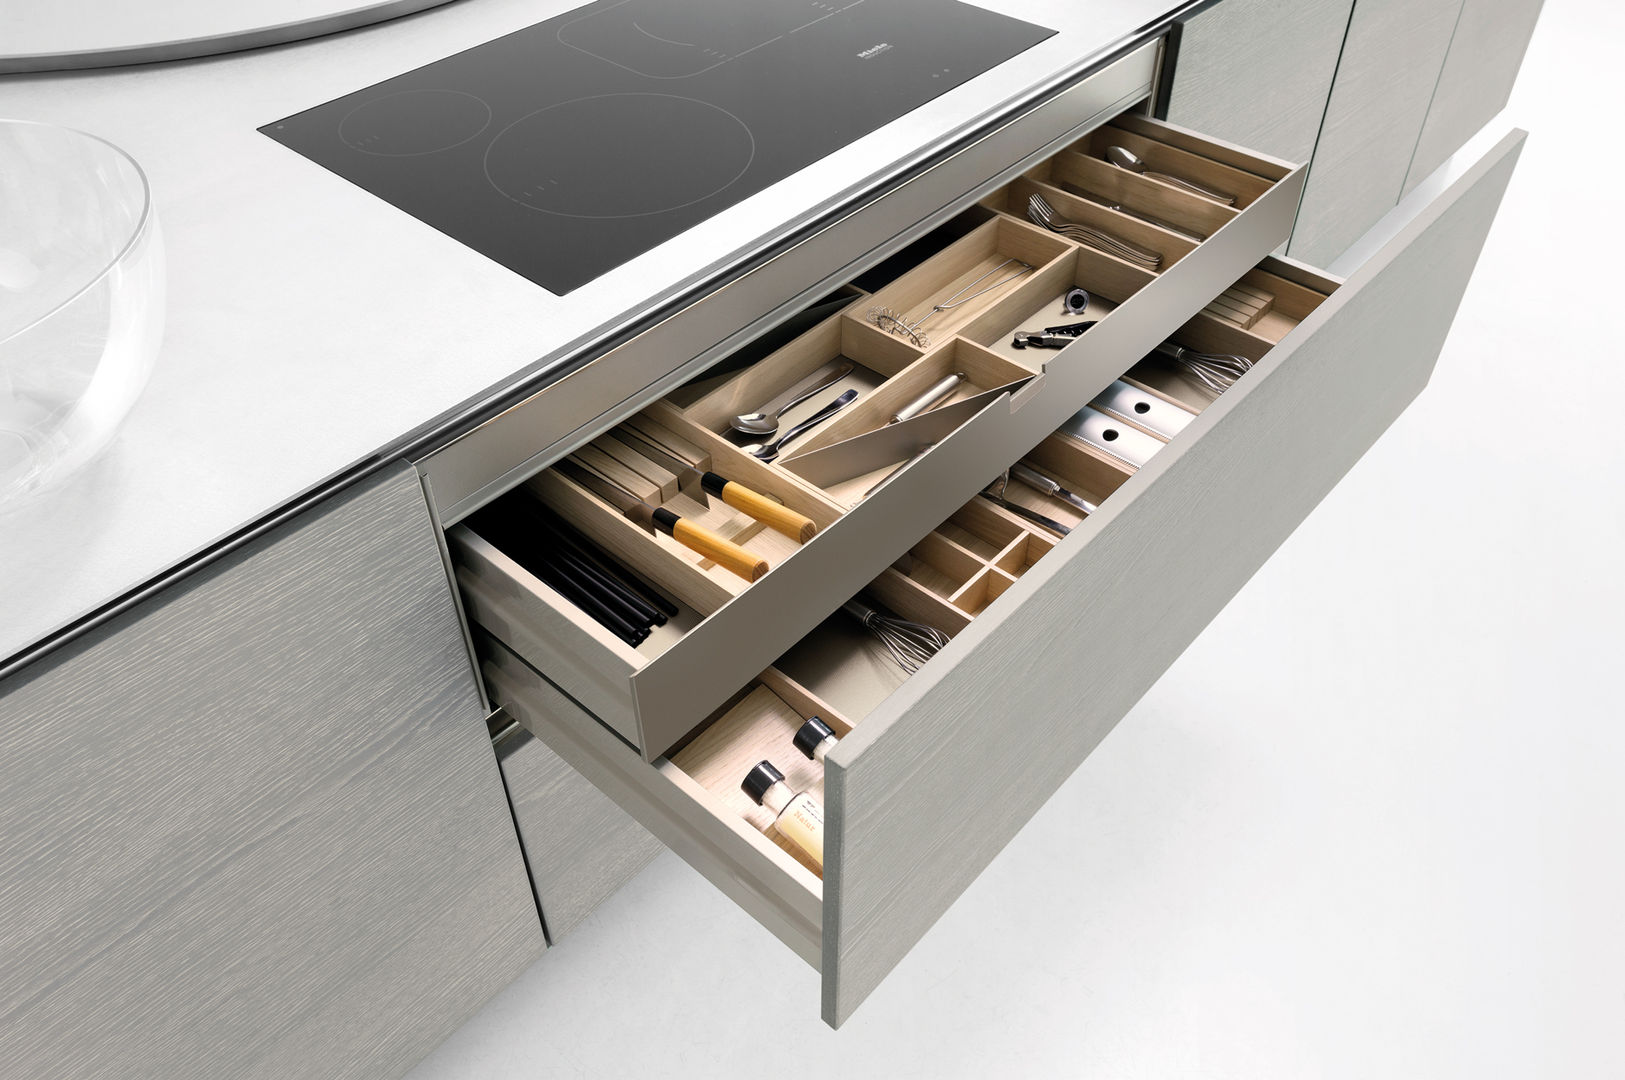 Storage options to make life easier fit Kitchens Modern kitchen Accessories & textiles